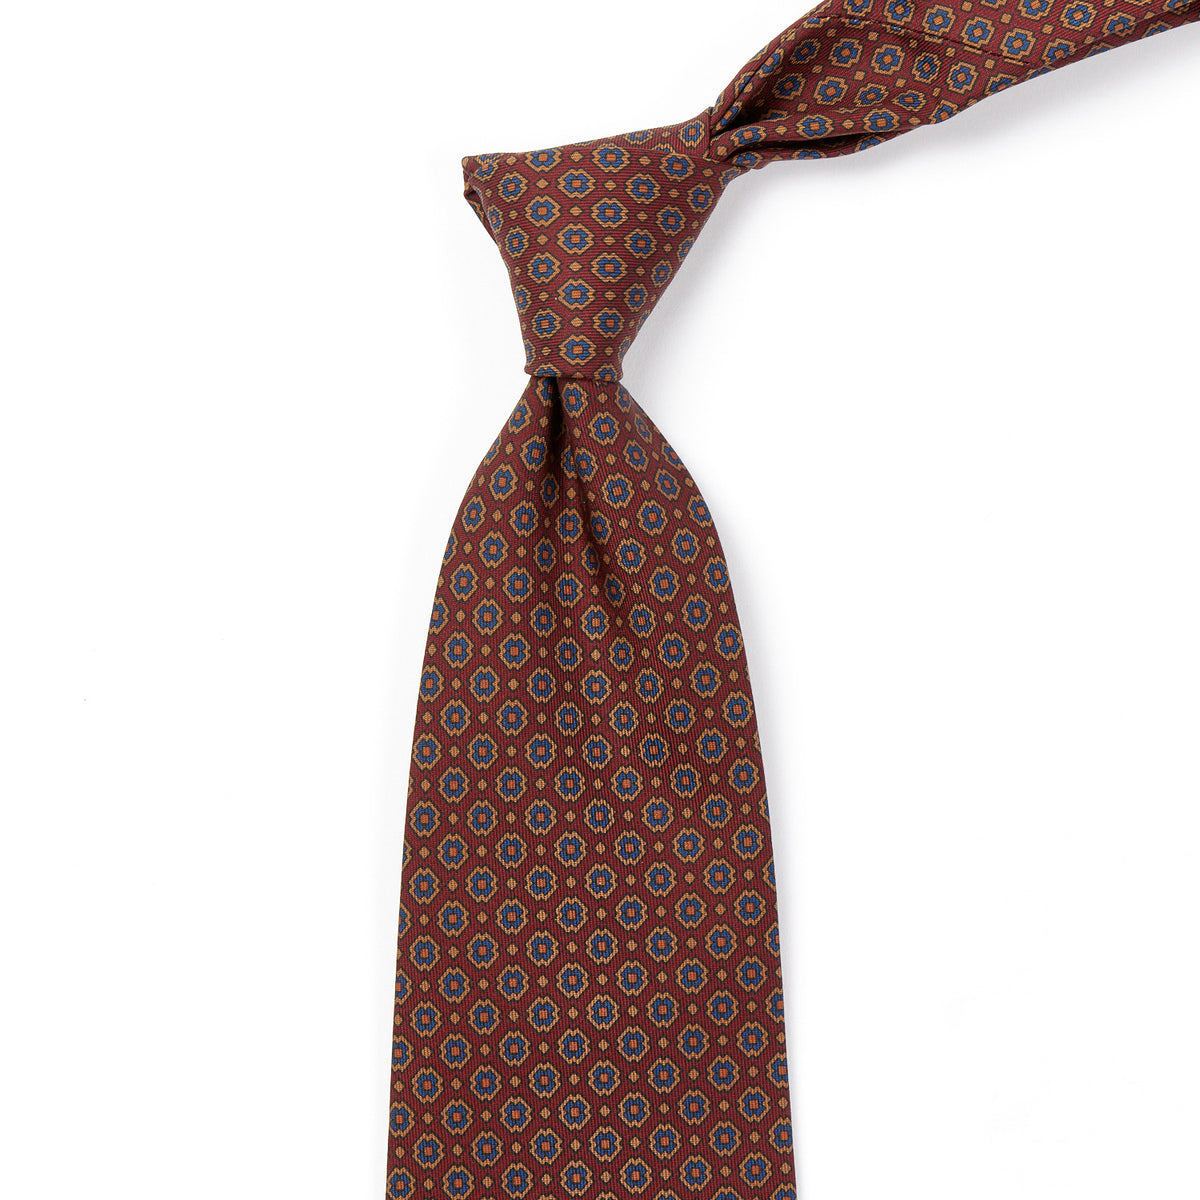 A Sovereign Grade Rust Small Floral Ancient Madder Tie by KirbyAllison.com, handmade in the United Kingdom.